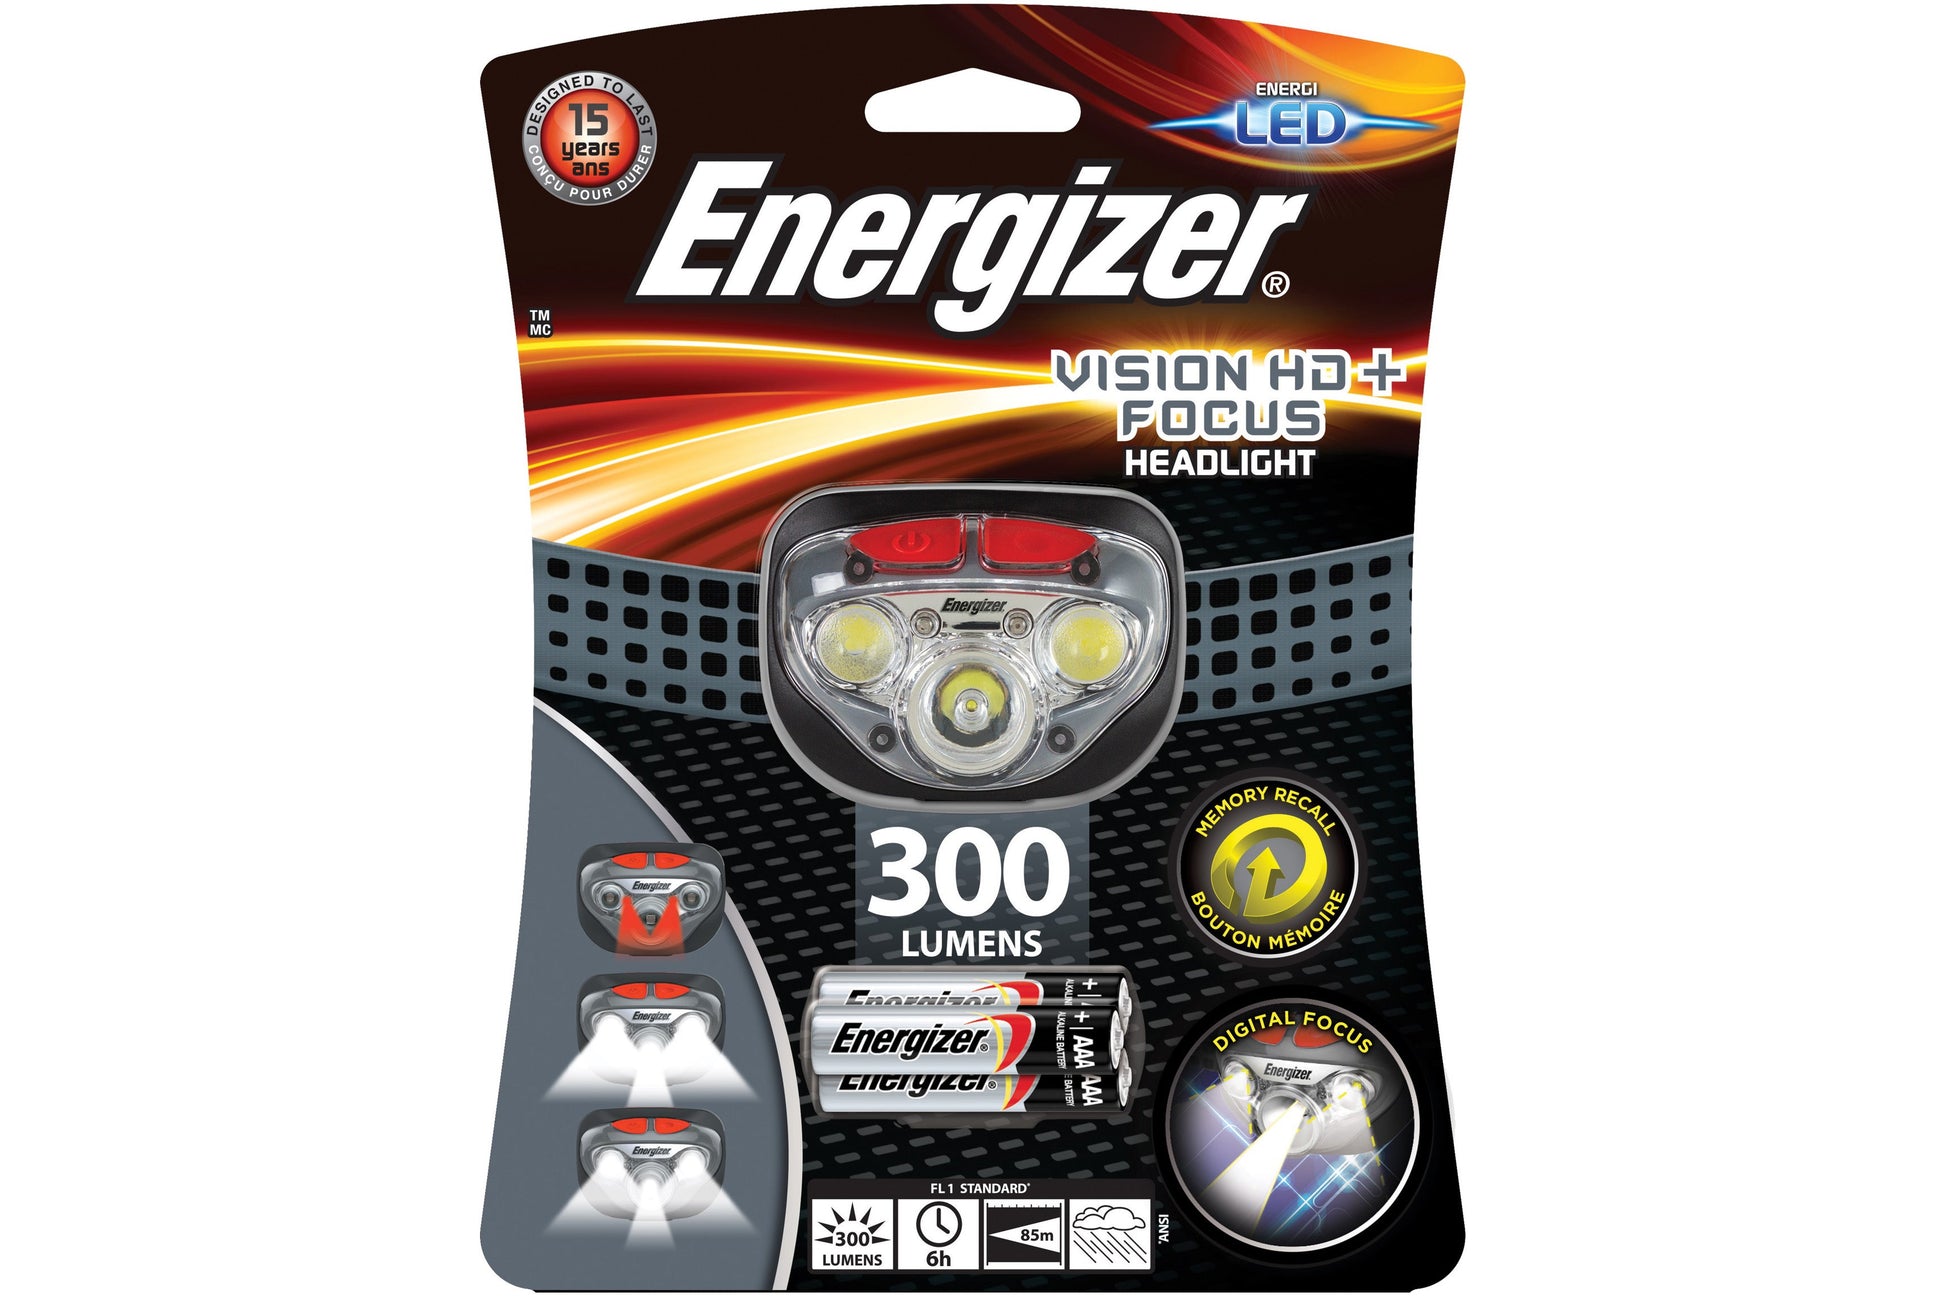 Energizer Vision HD+ Focus 300 Lumens LED Head Torch with 3x AAA Batteries - maplin.co.uk